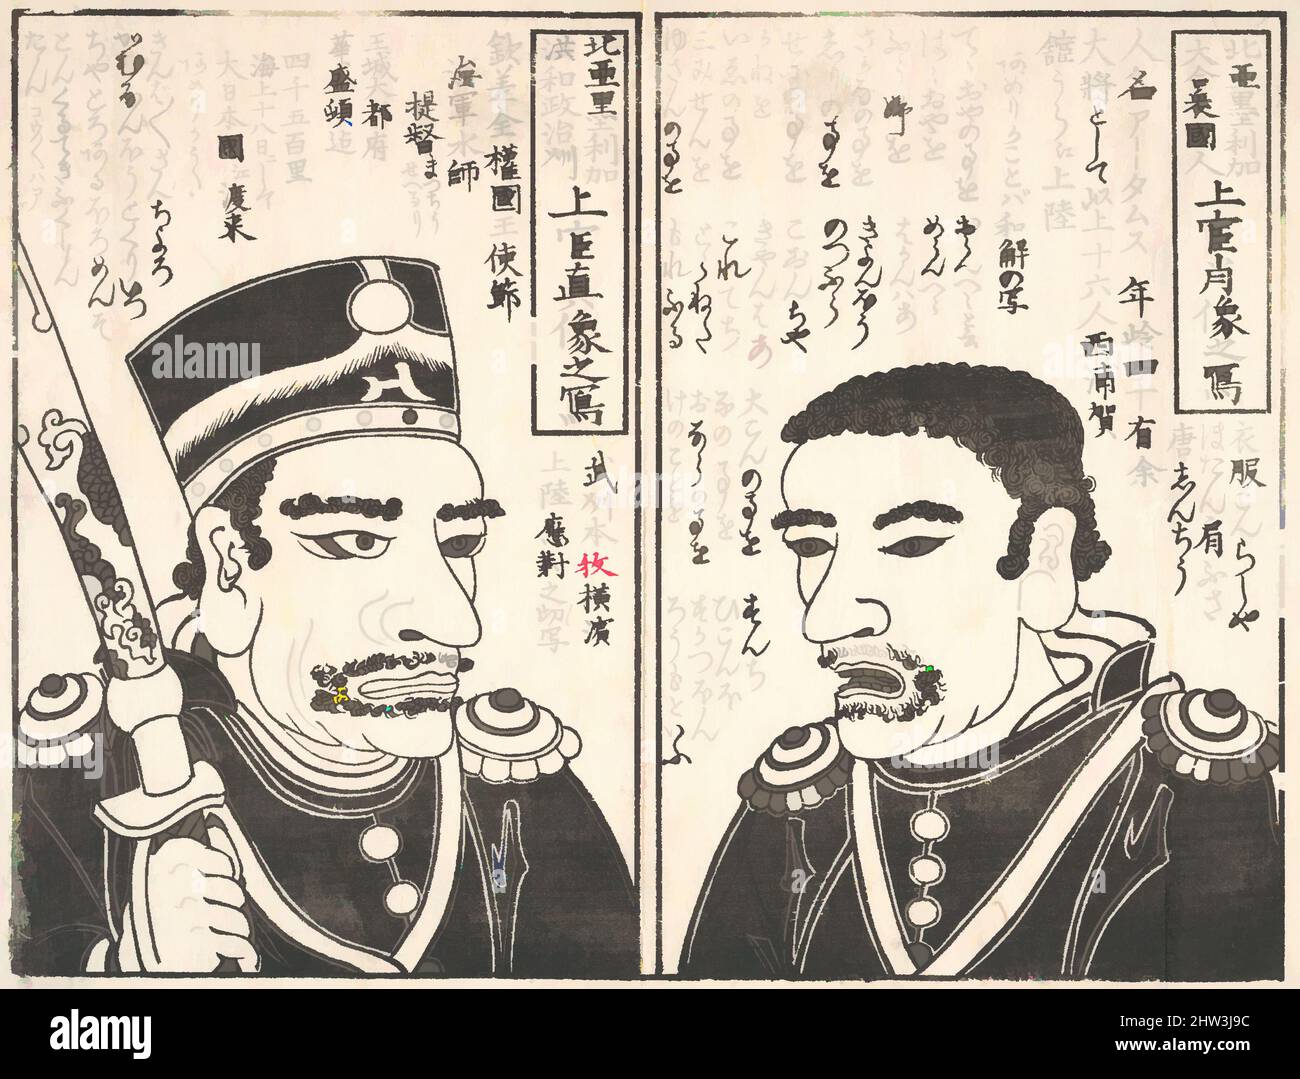 Art inspired by Portraits of American Naval Officers, Adams and Perry, Edo period (1615–1868), Japan, Monochrome woodblock print; ink on paper, 8 3/4 x 11 1/2 in. (22.2 x 29.2 cm), Prints, Unidentified Artist, Classic works modernized by Artotop with a splash of modernity. Shapes, color and value, eye-catching visual impact on art. Emotions through freedom of artworks in a contemporary way. A timeless message pursuing a wildly creative new direction. Artists turning to the digital medium and creating the Artotop NFT Stock Photo